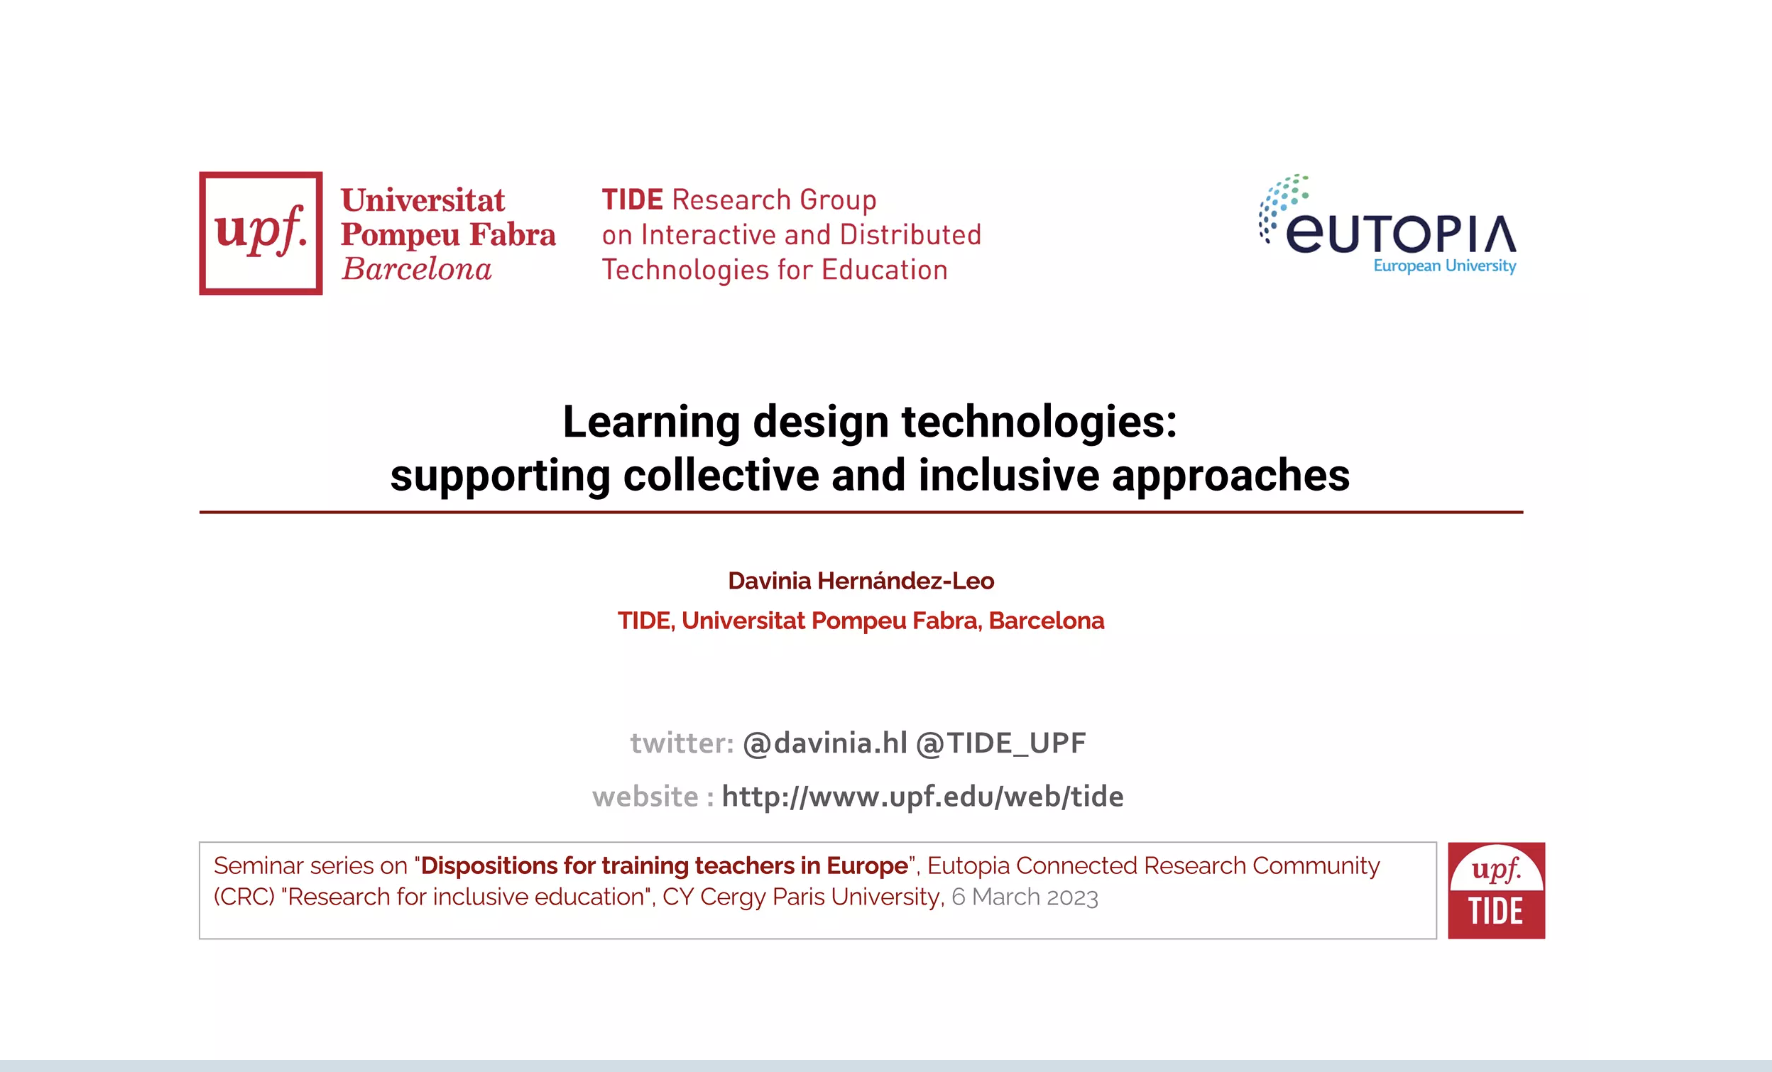 Seminar on Learning design technologies: supporting collective and inclusive approaches